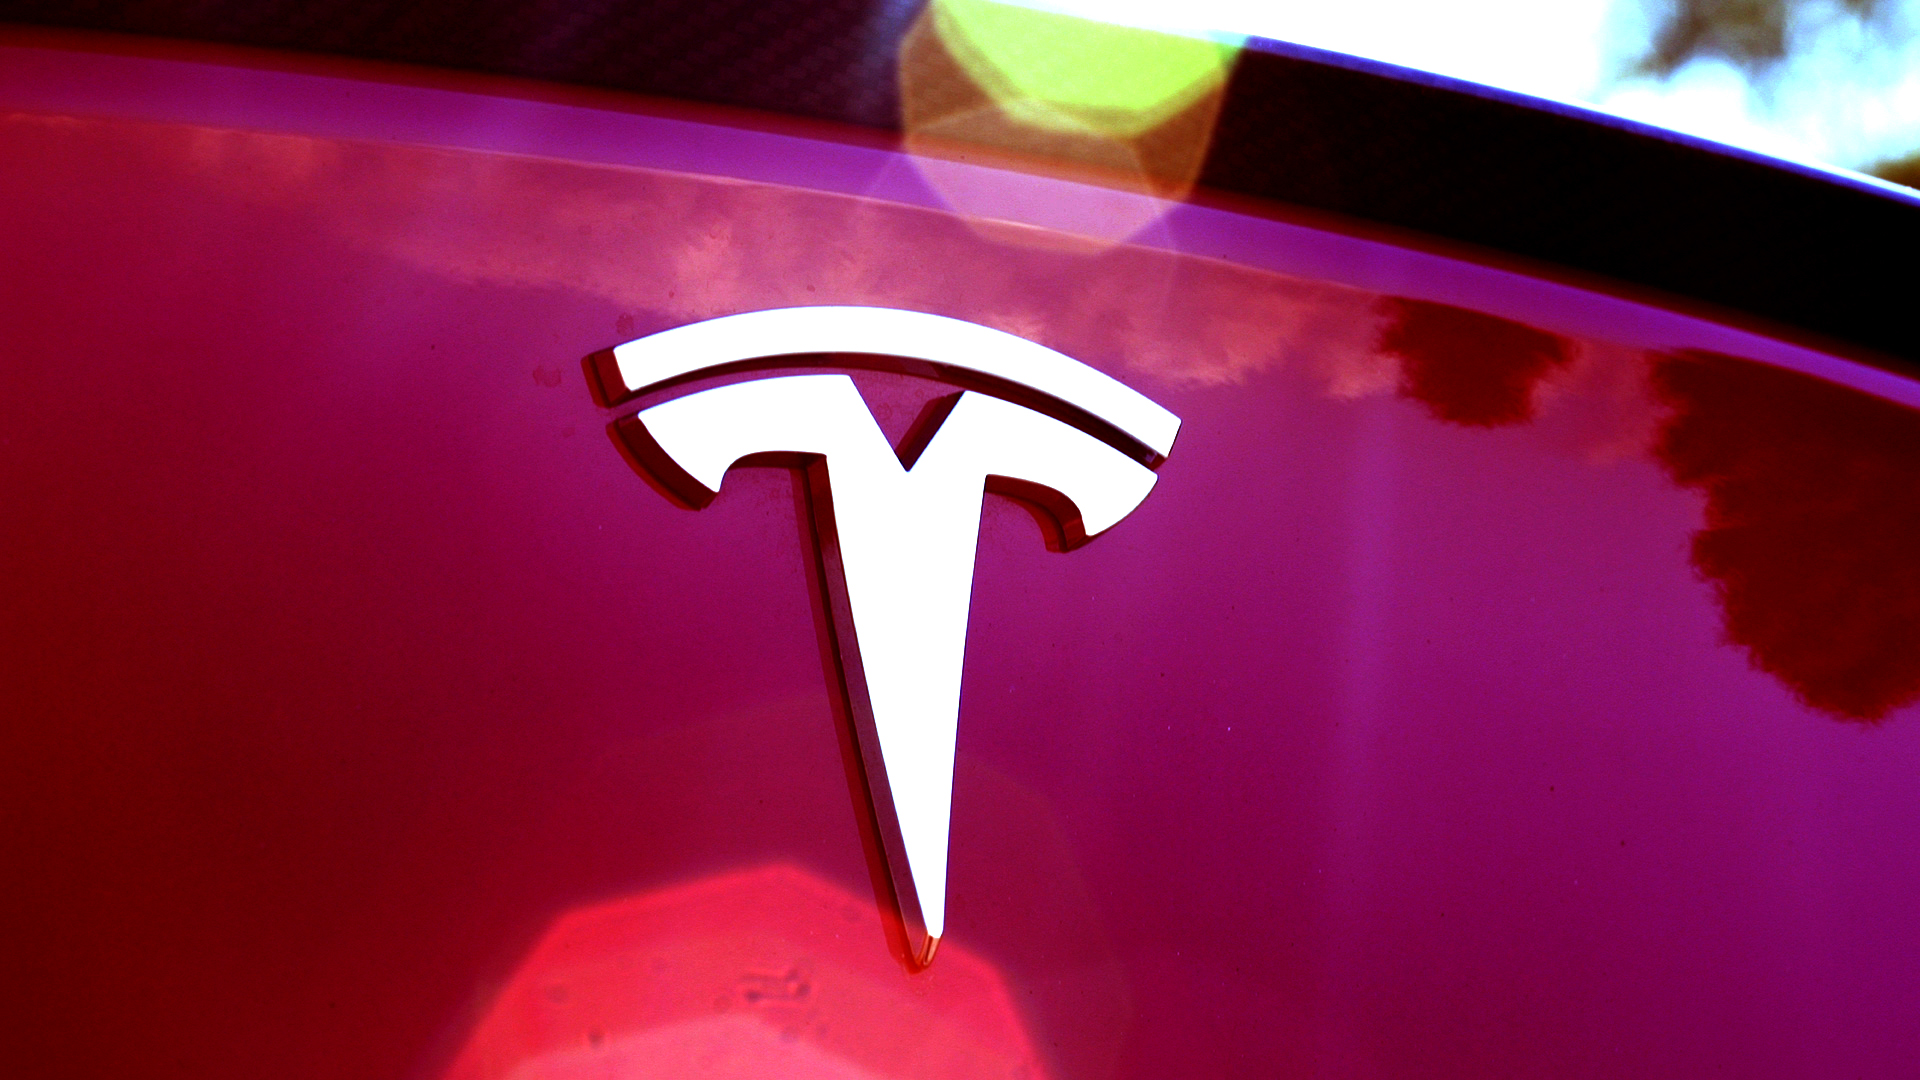 Tesla Wants To Bundle Car Sales With Insurance And Maintenance